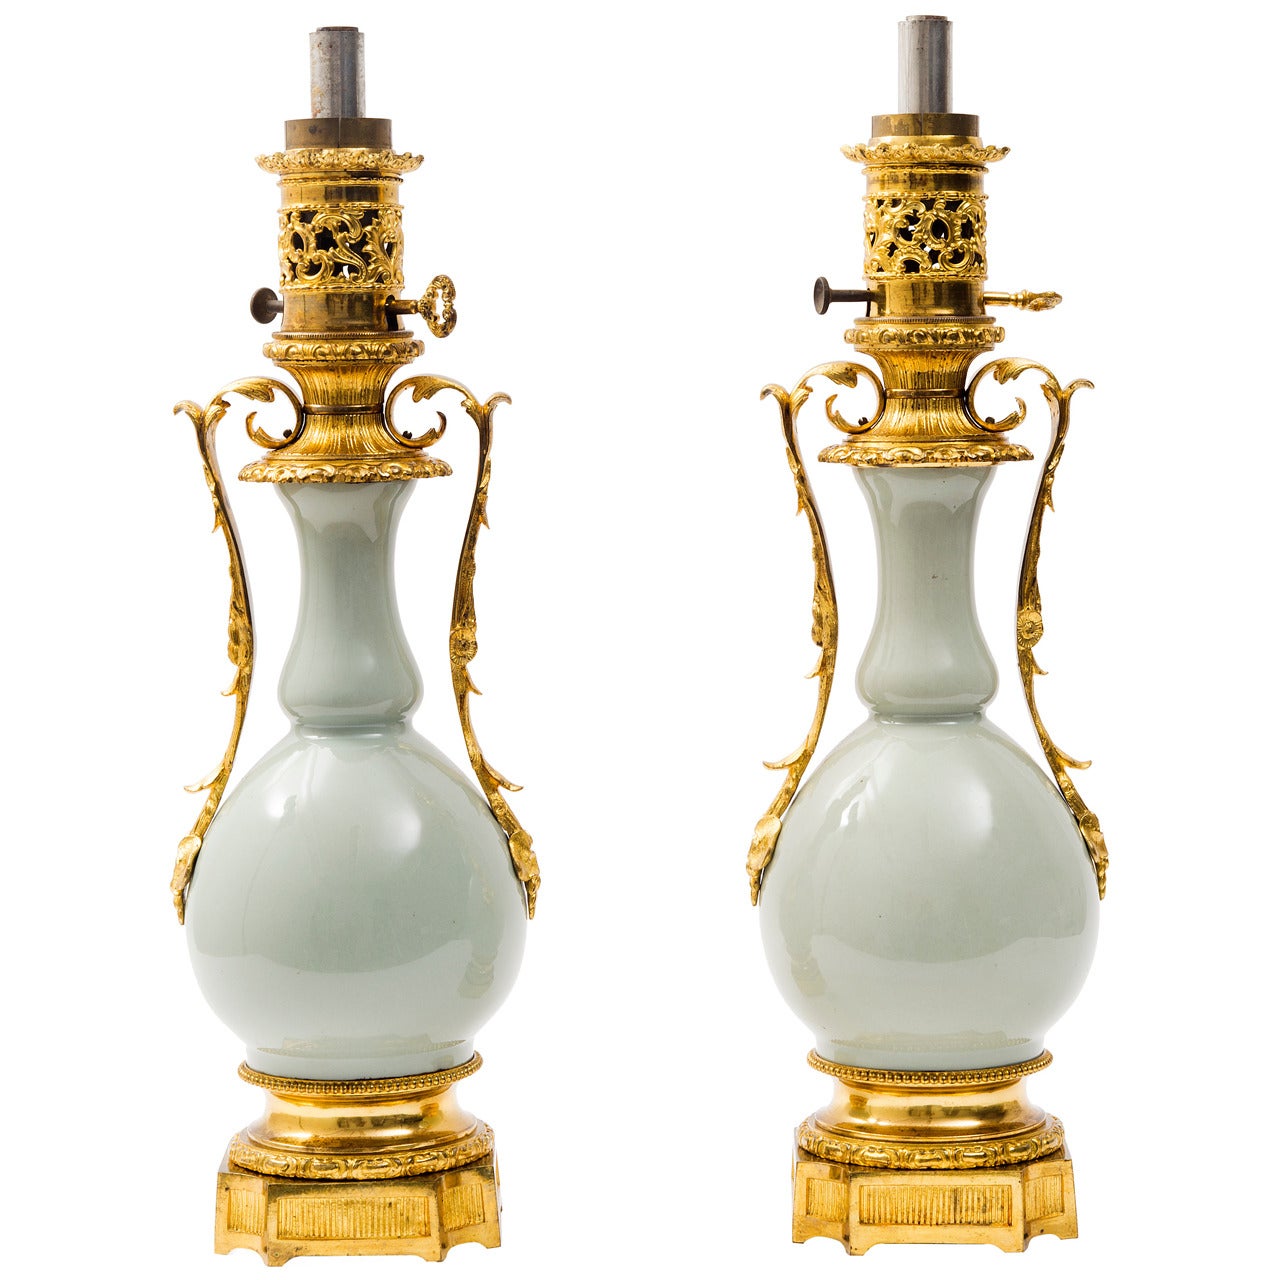 Pair of French Gilt Bronze and Celadon Porcelain Double Gourd Lamps, circa 1900